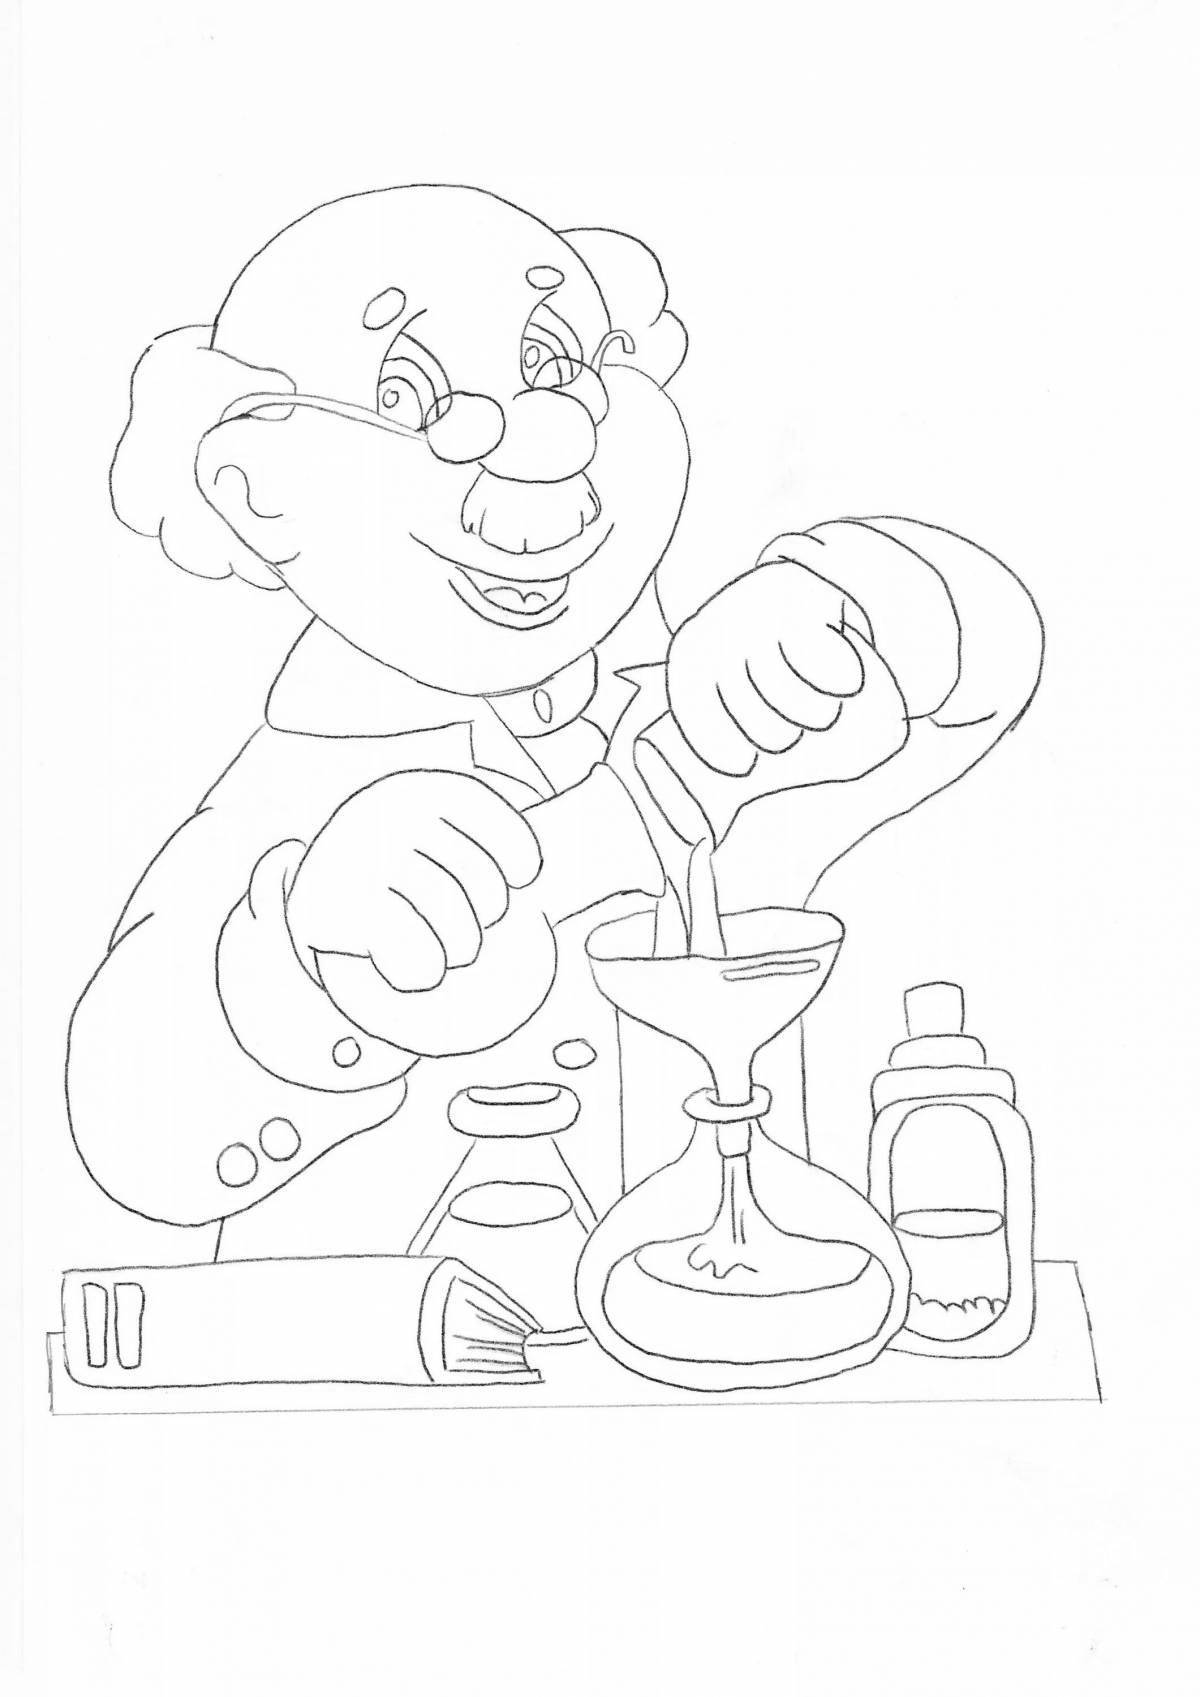 Coloring game stimulating experiments